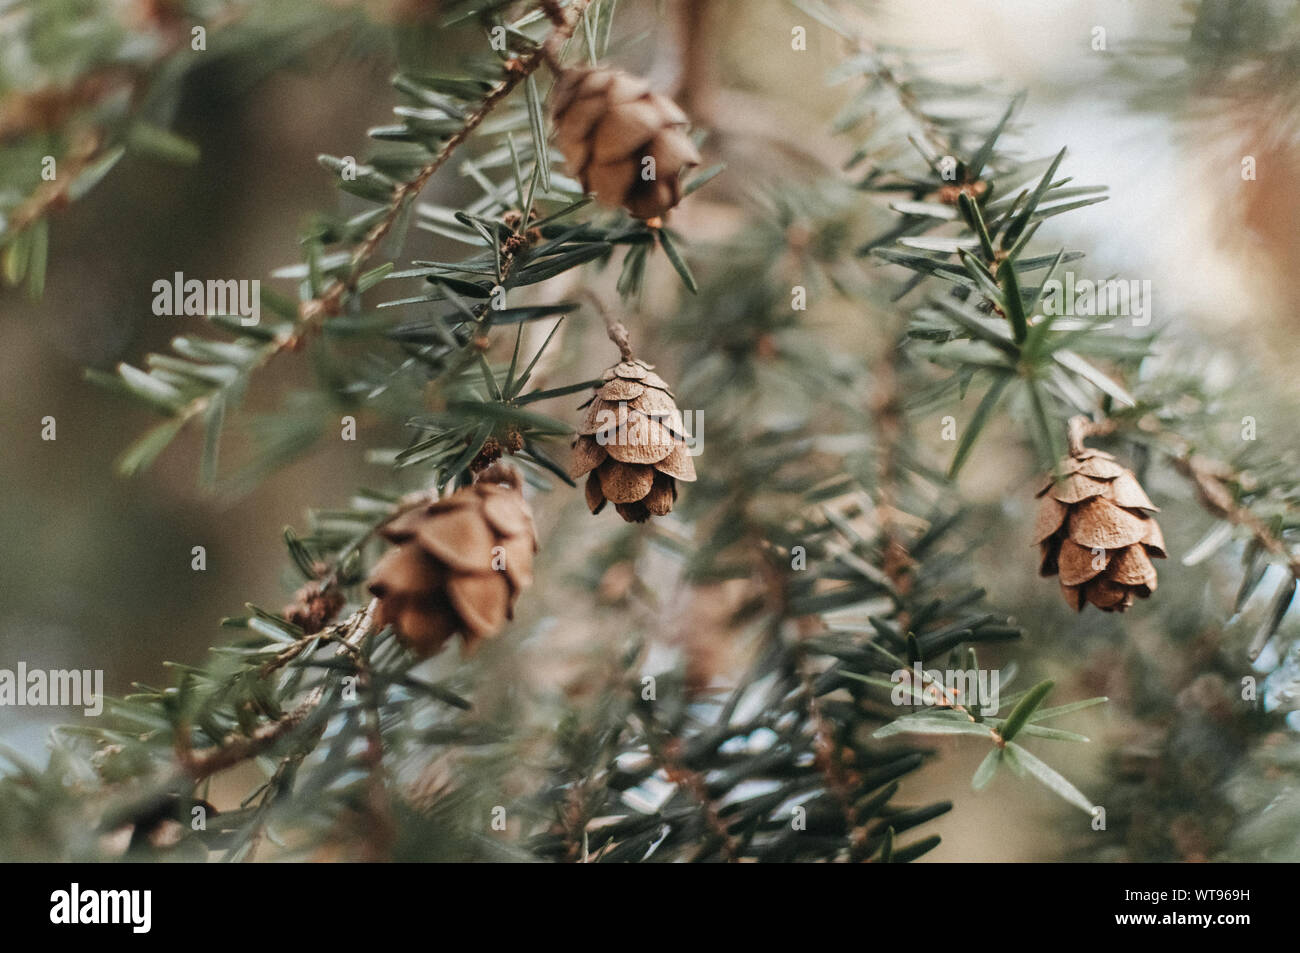 Eastern Hemlock Tree High Resolution Stock Photography and Images - Alamy